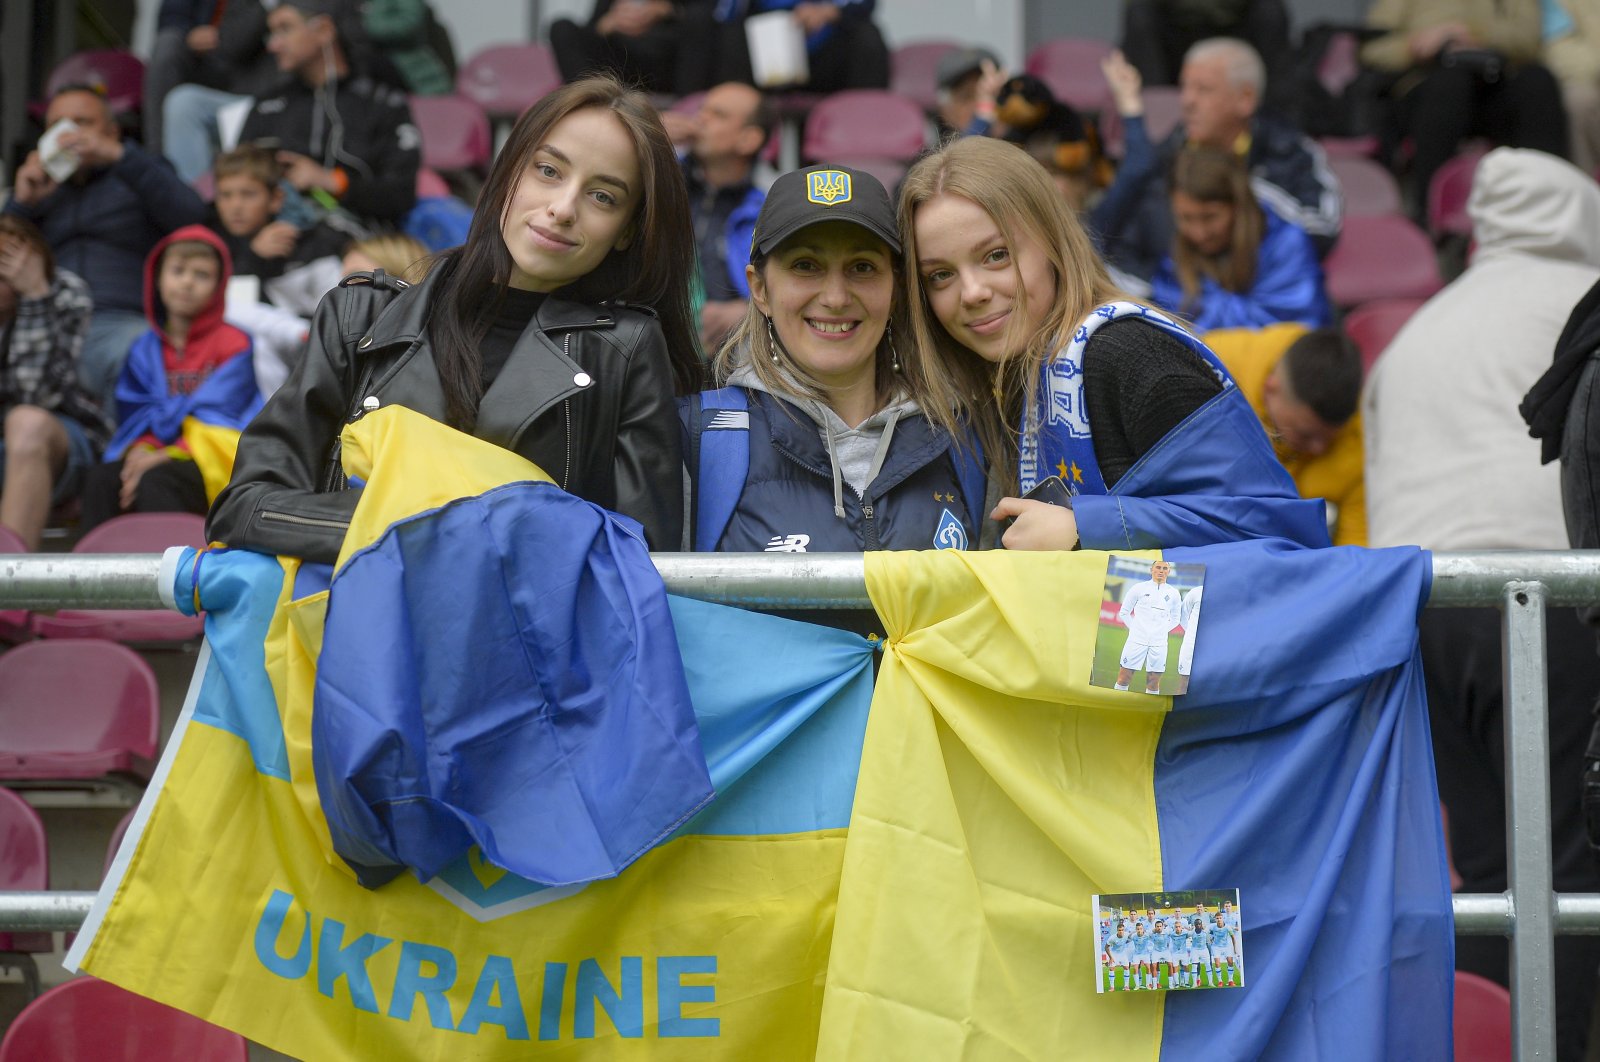 Ukrainian supporters pose next to the Ukrainian flag during the European Youth League round of 16 soccer match between Dynamo Kyiv U19 and Sporting CP U19, at the Giulesti stadium in Bucharest, Romania, April 7, 2022. (AP Photo)